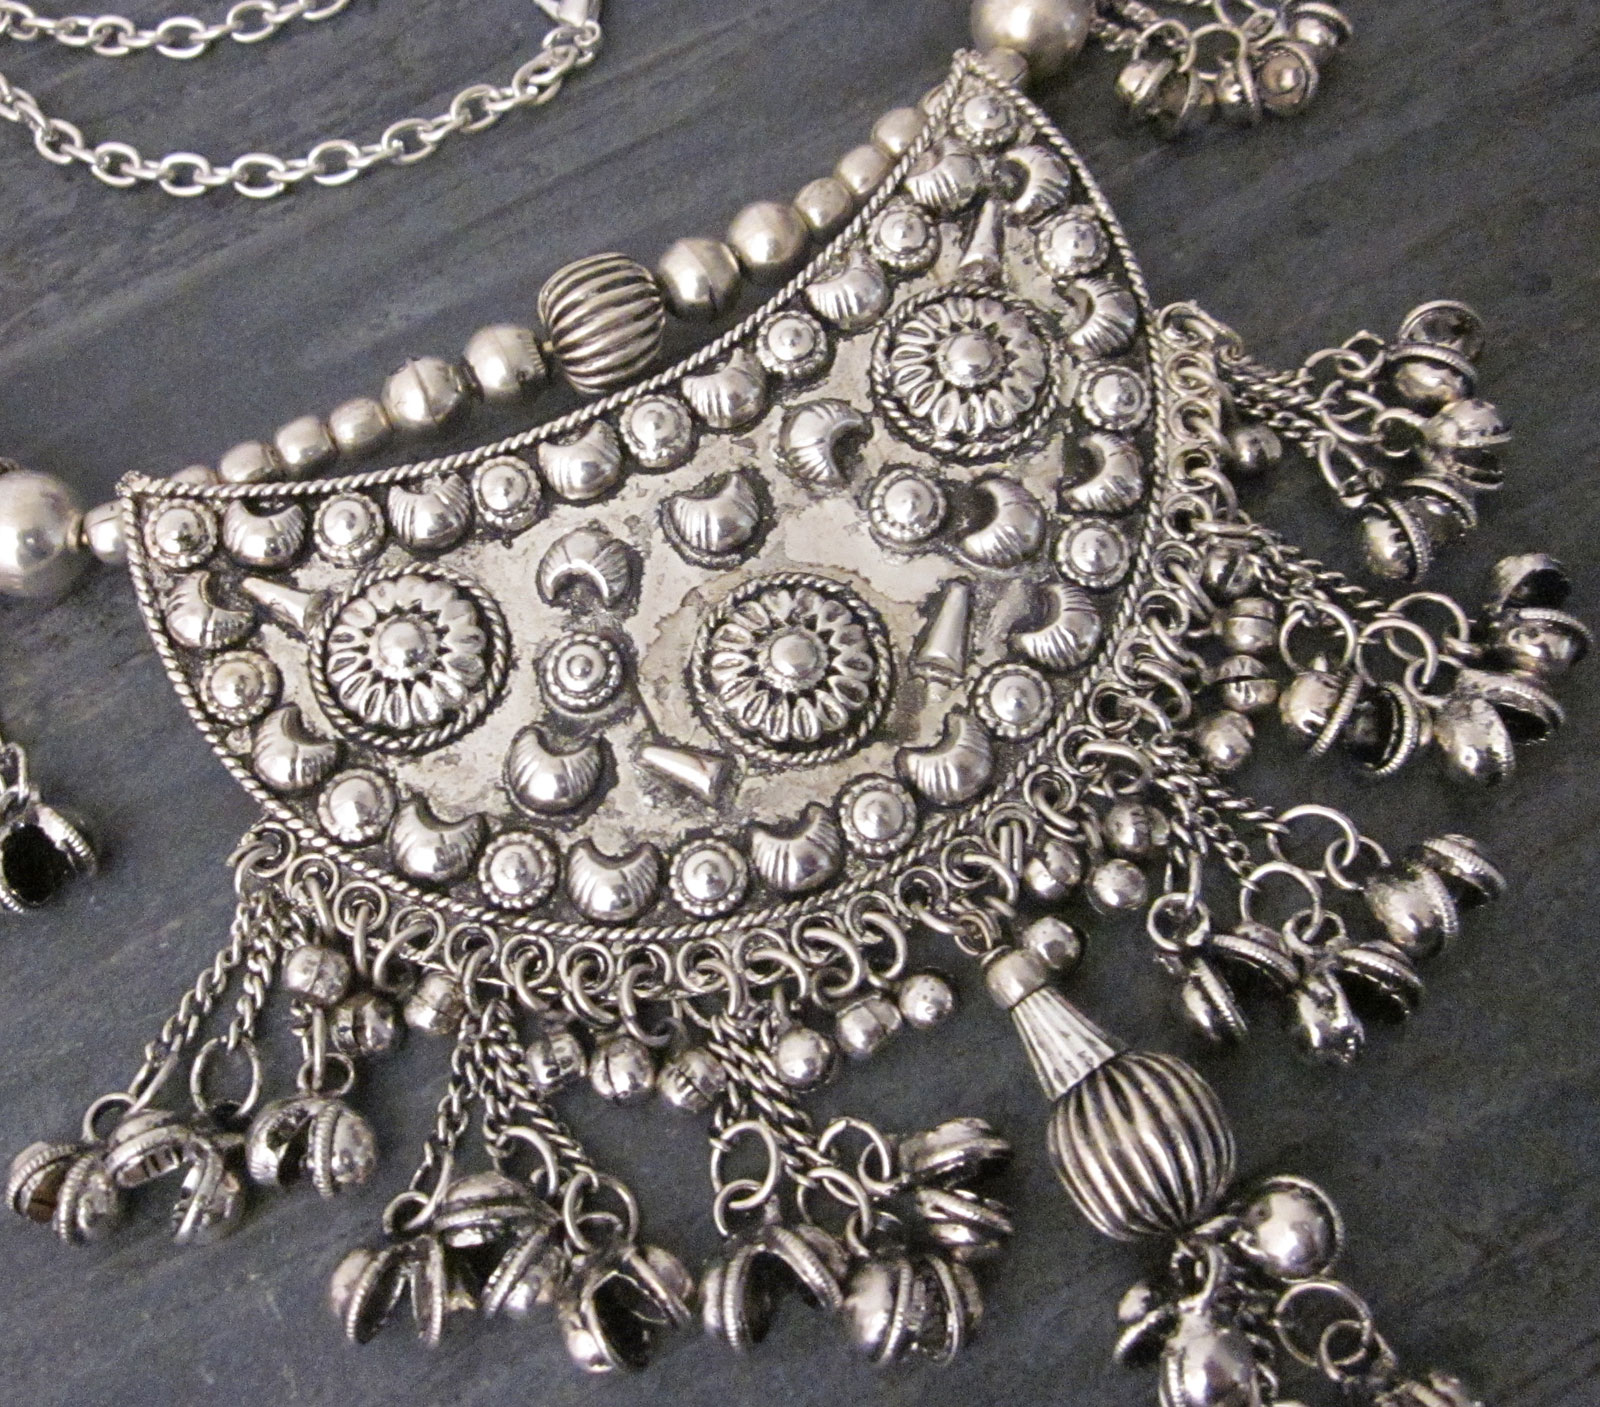 NEW! NECKLACE SILVER COIN & MIRROR MEDALLION CHOKER TRIBAL BELLY DANCE 